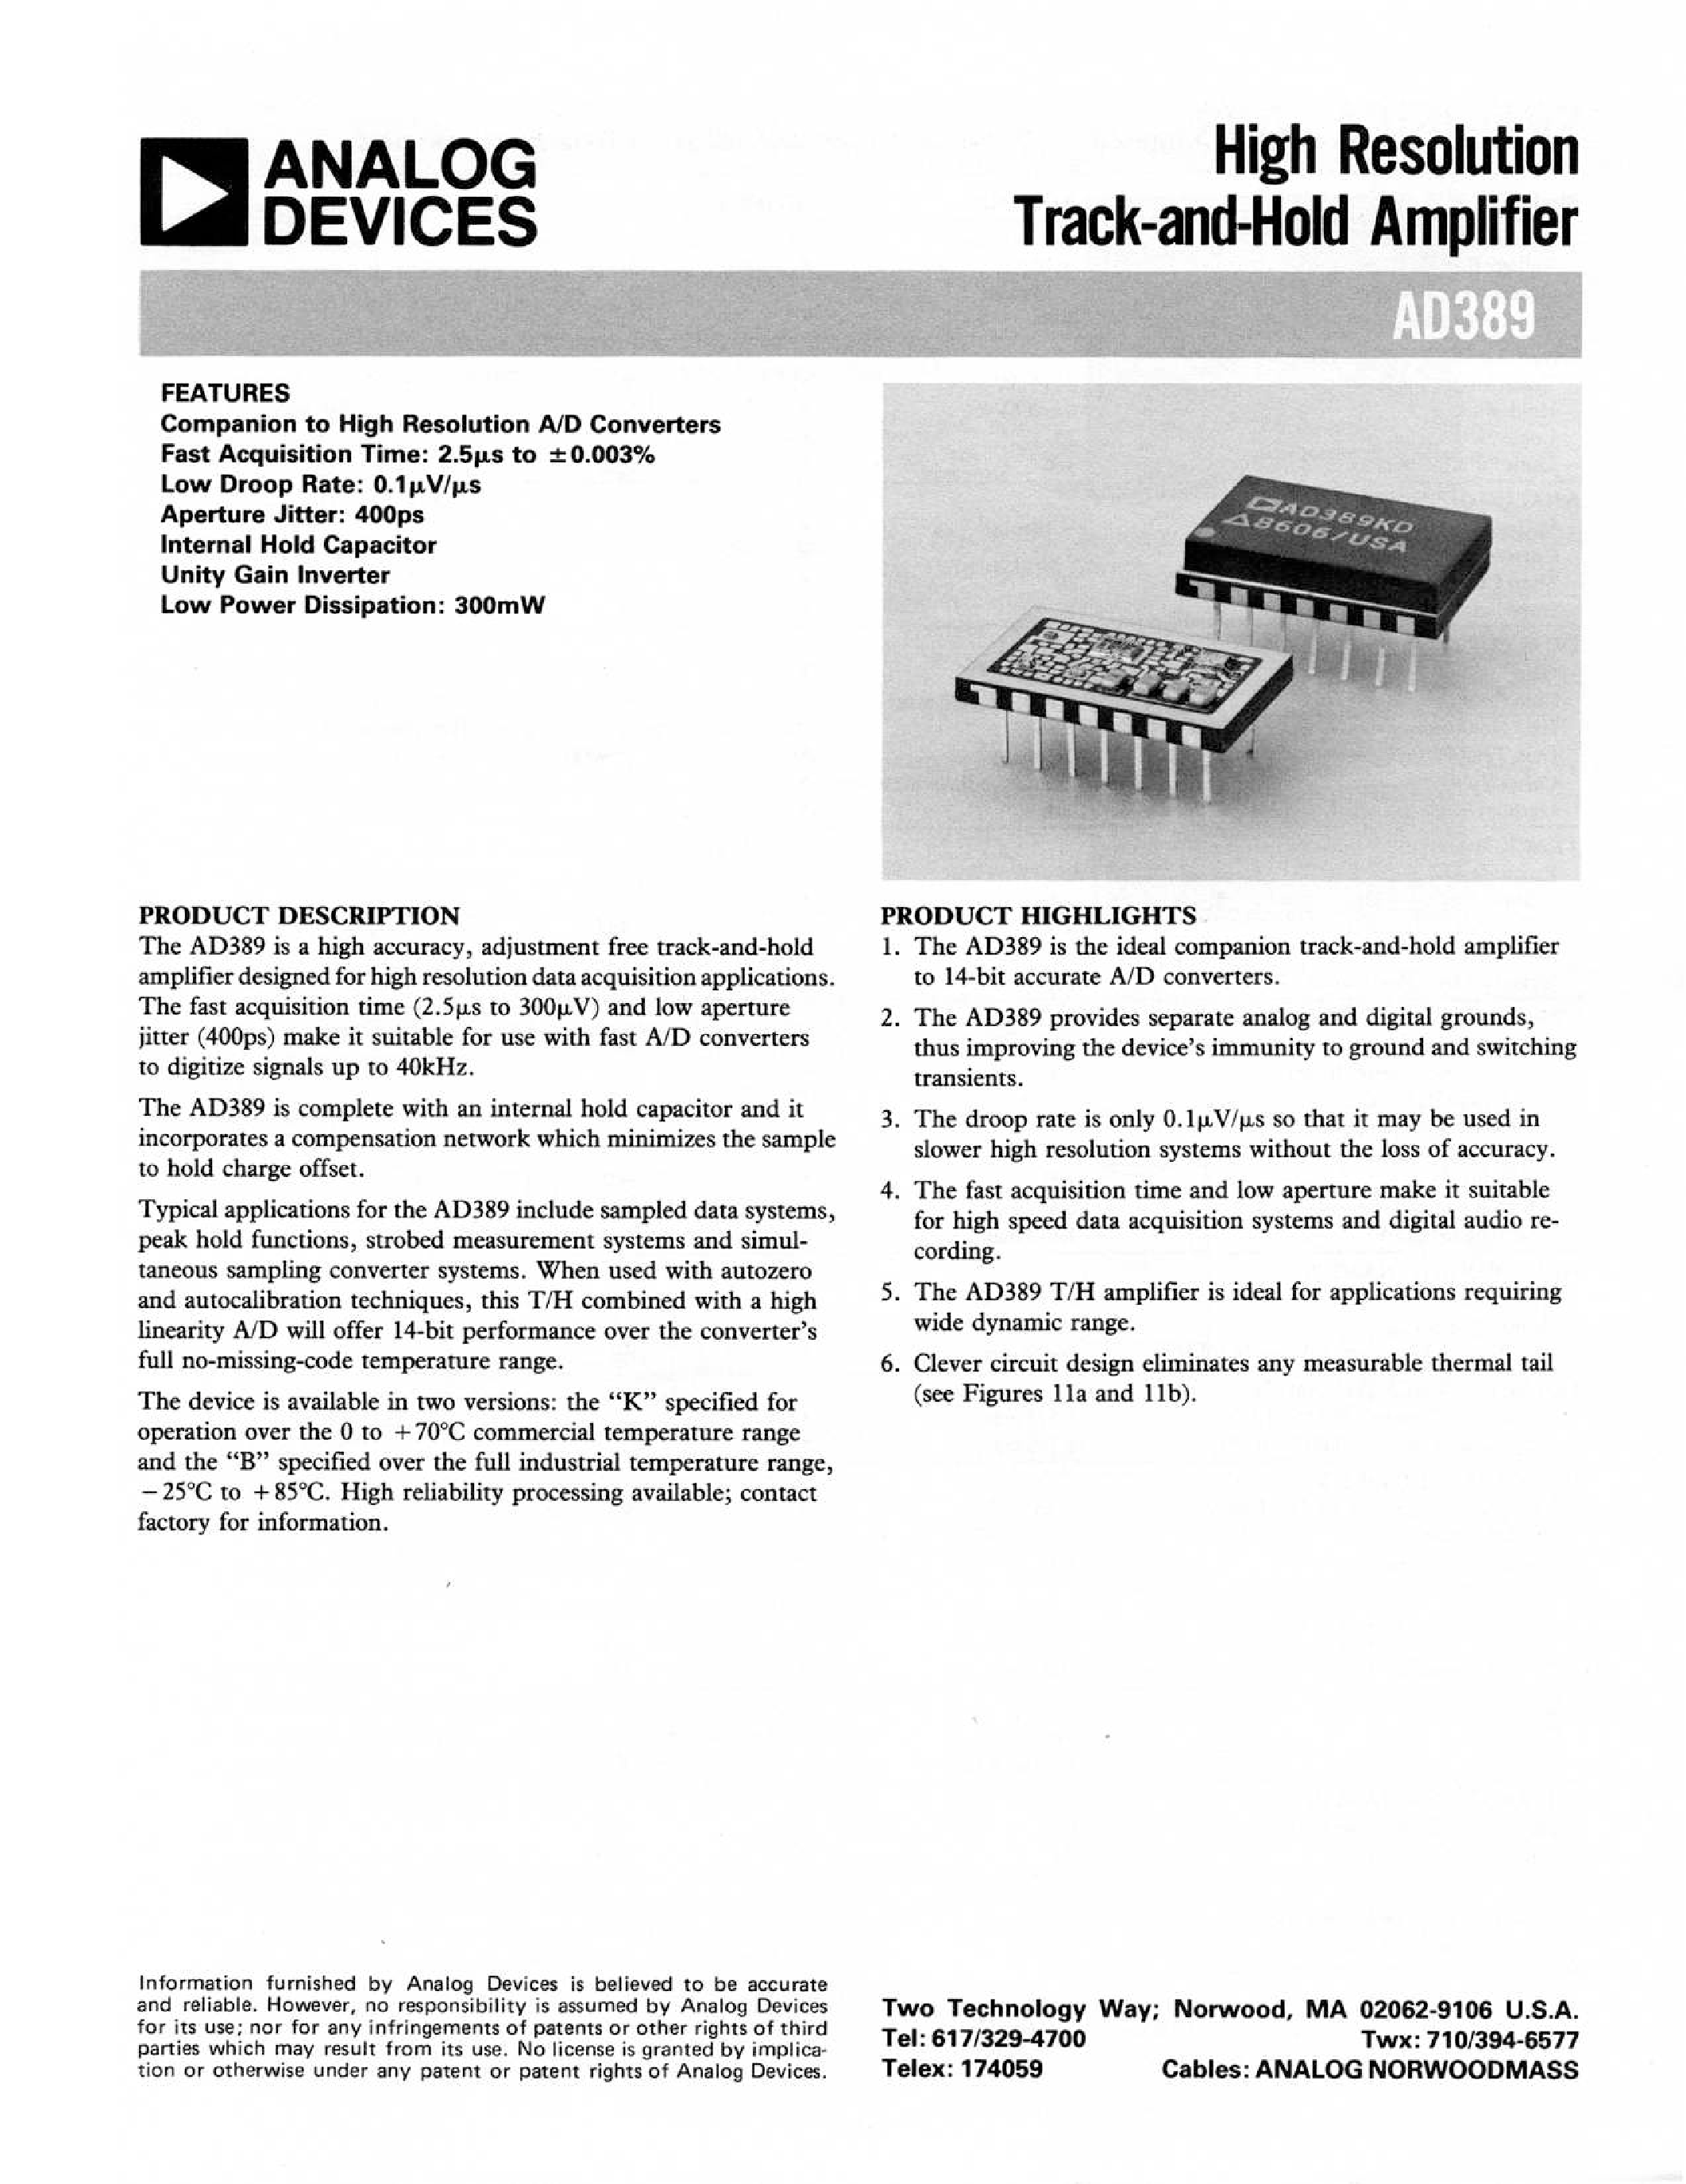 Datasheet AD389KD - HIGH RESOLUTION TRACK-AND-HOLD AMPLIFIER page 1